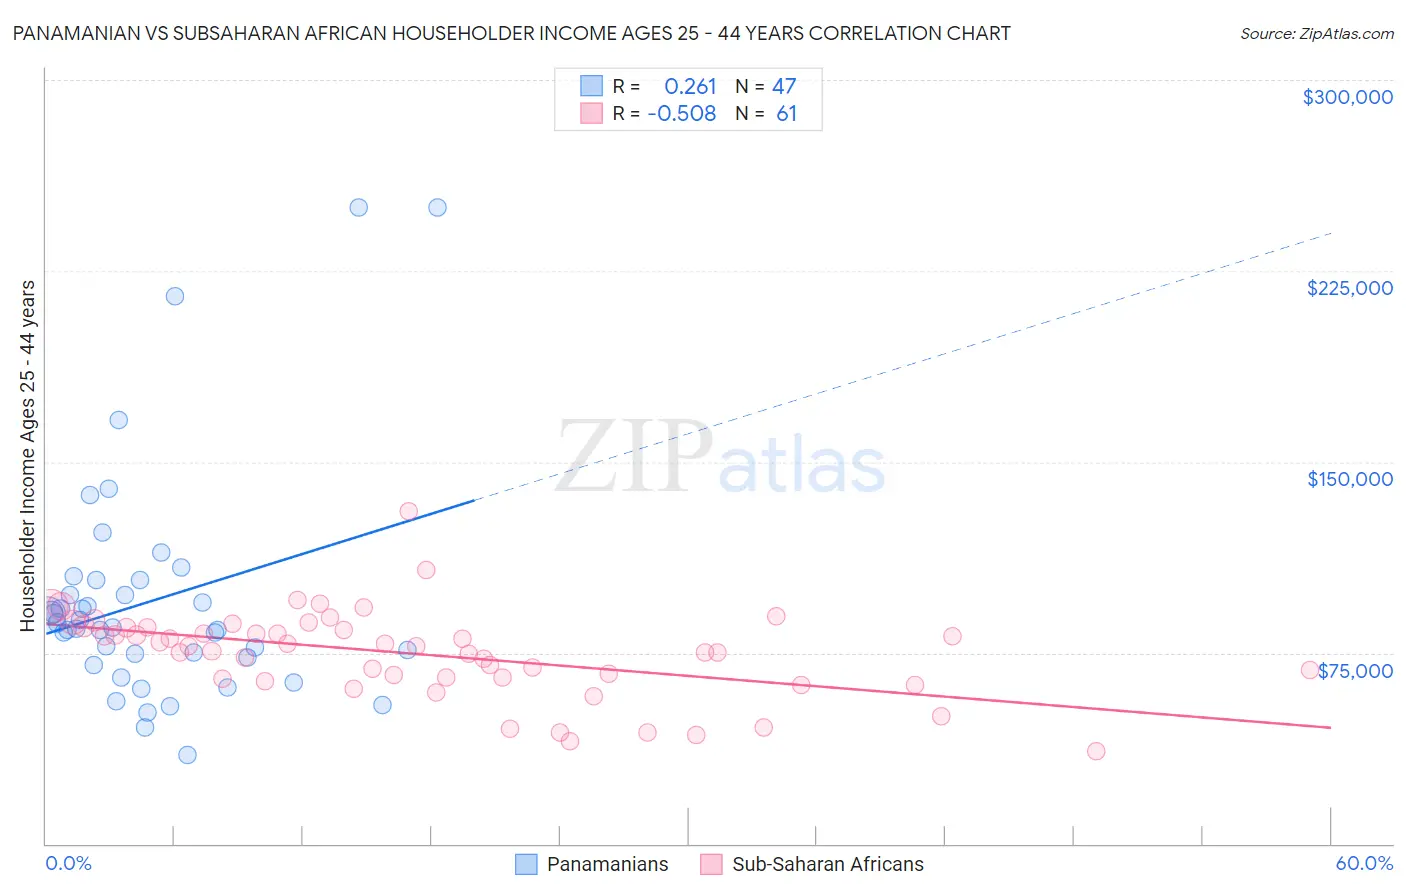 Panamanian vs Subsaharan African Householder Income Ages 25 - 44 years